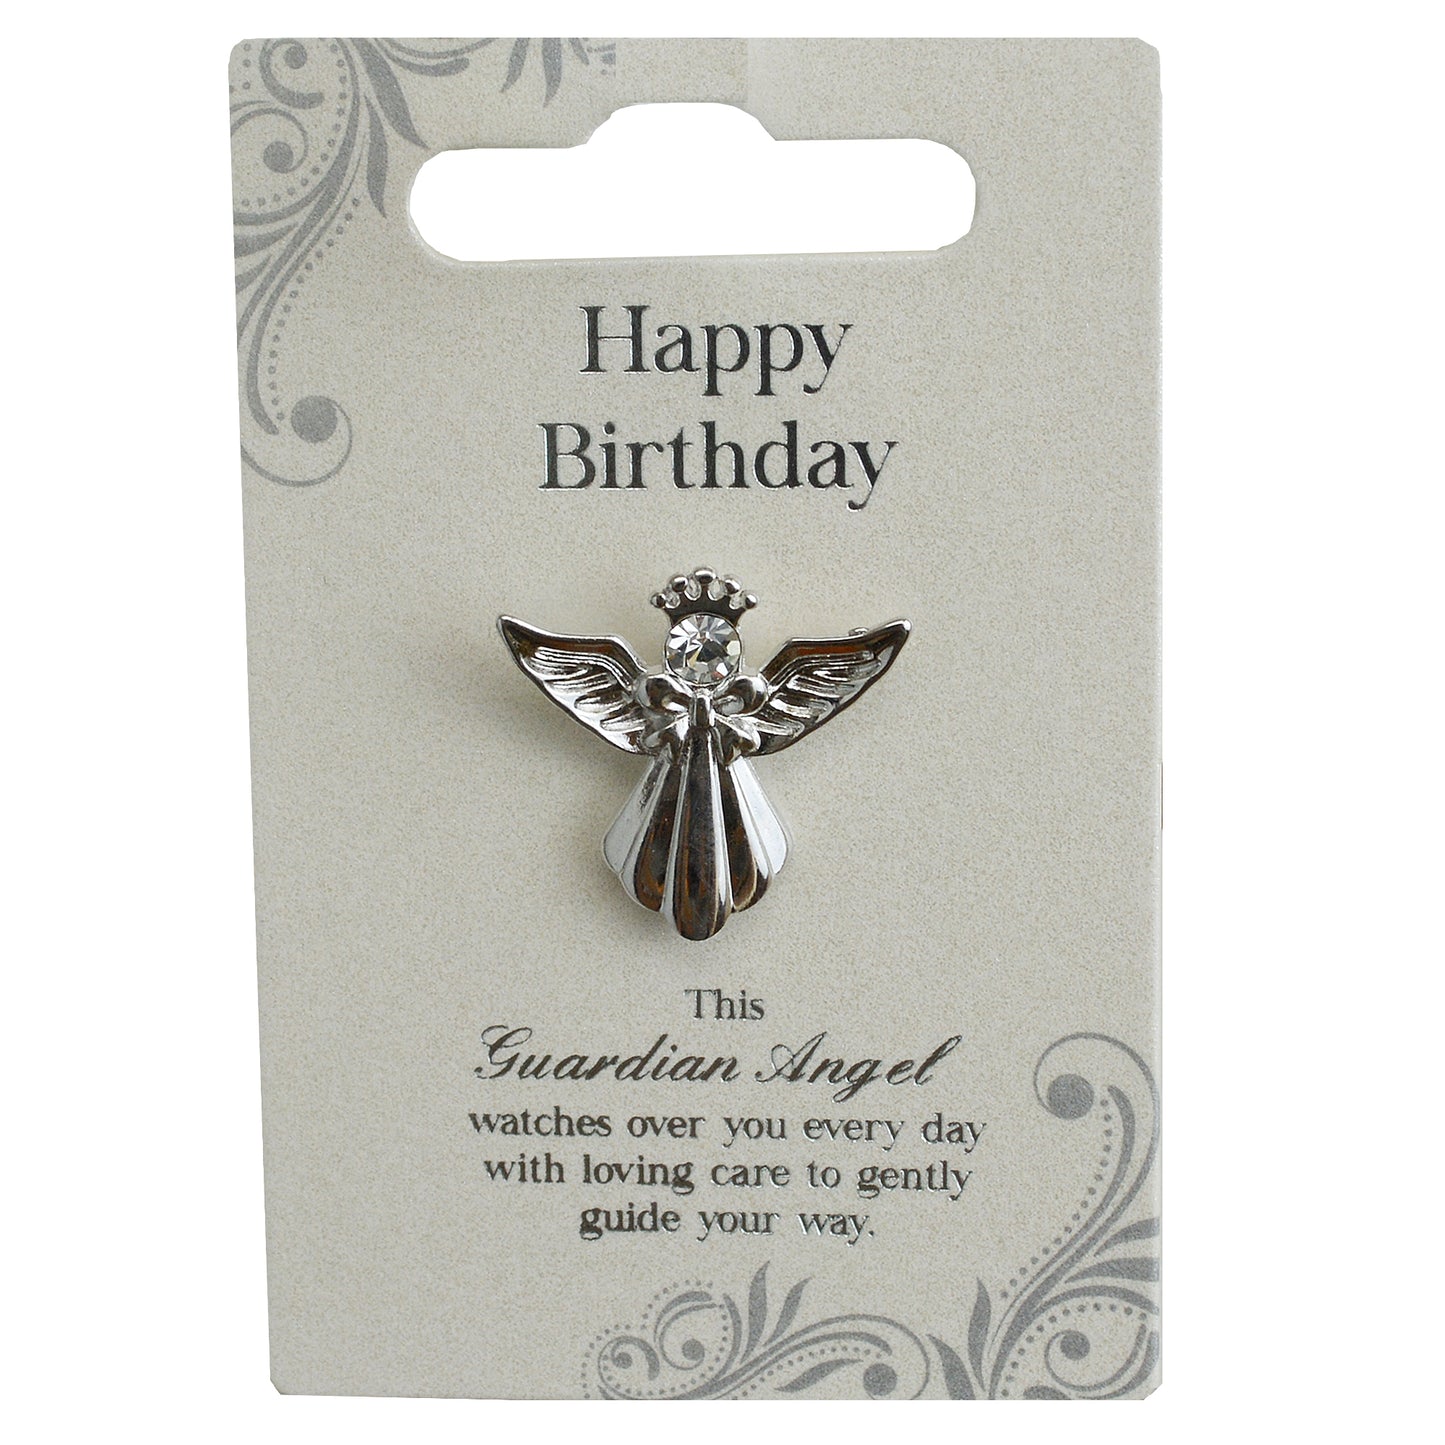 Happy Birthday Silver Coloured Angel Pin With Gem Stone